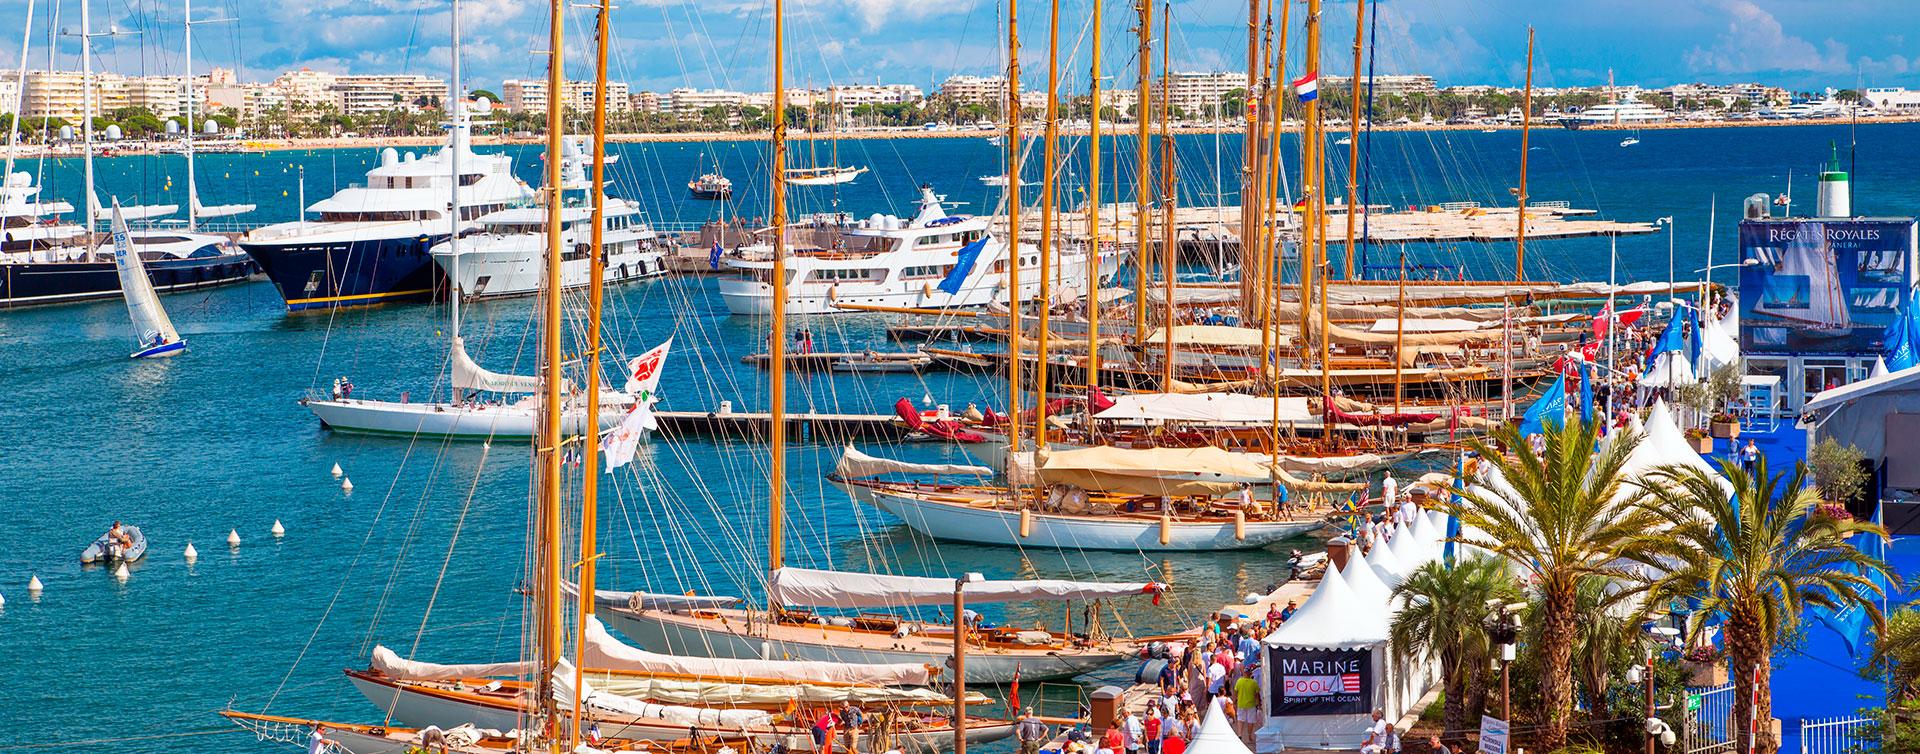 Locations Cannes Yachting Festival 2024